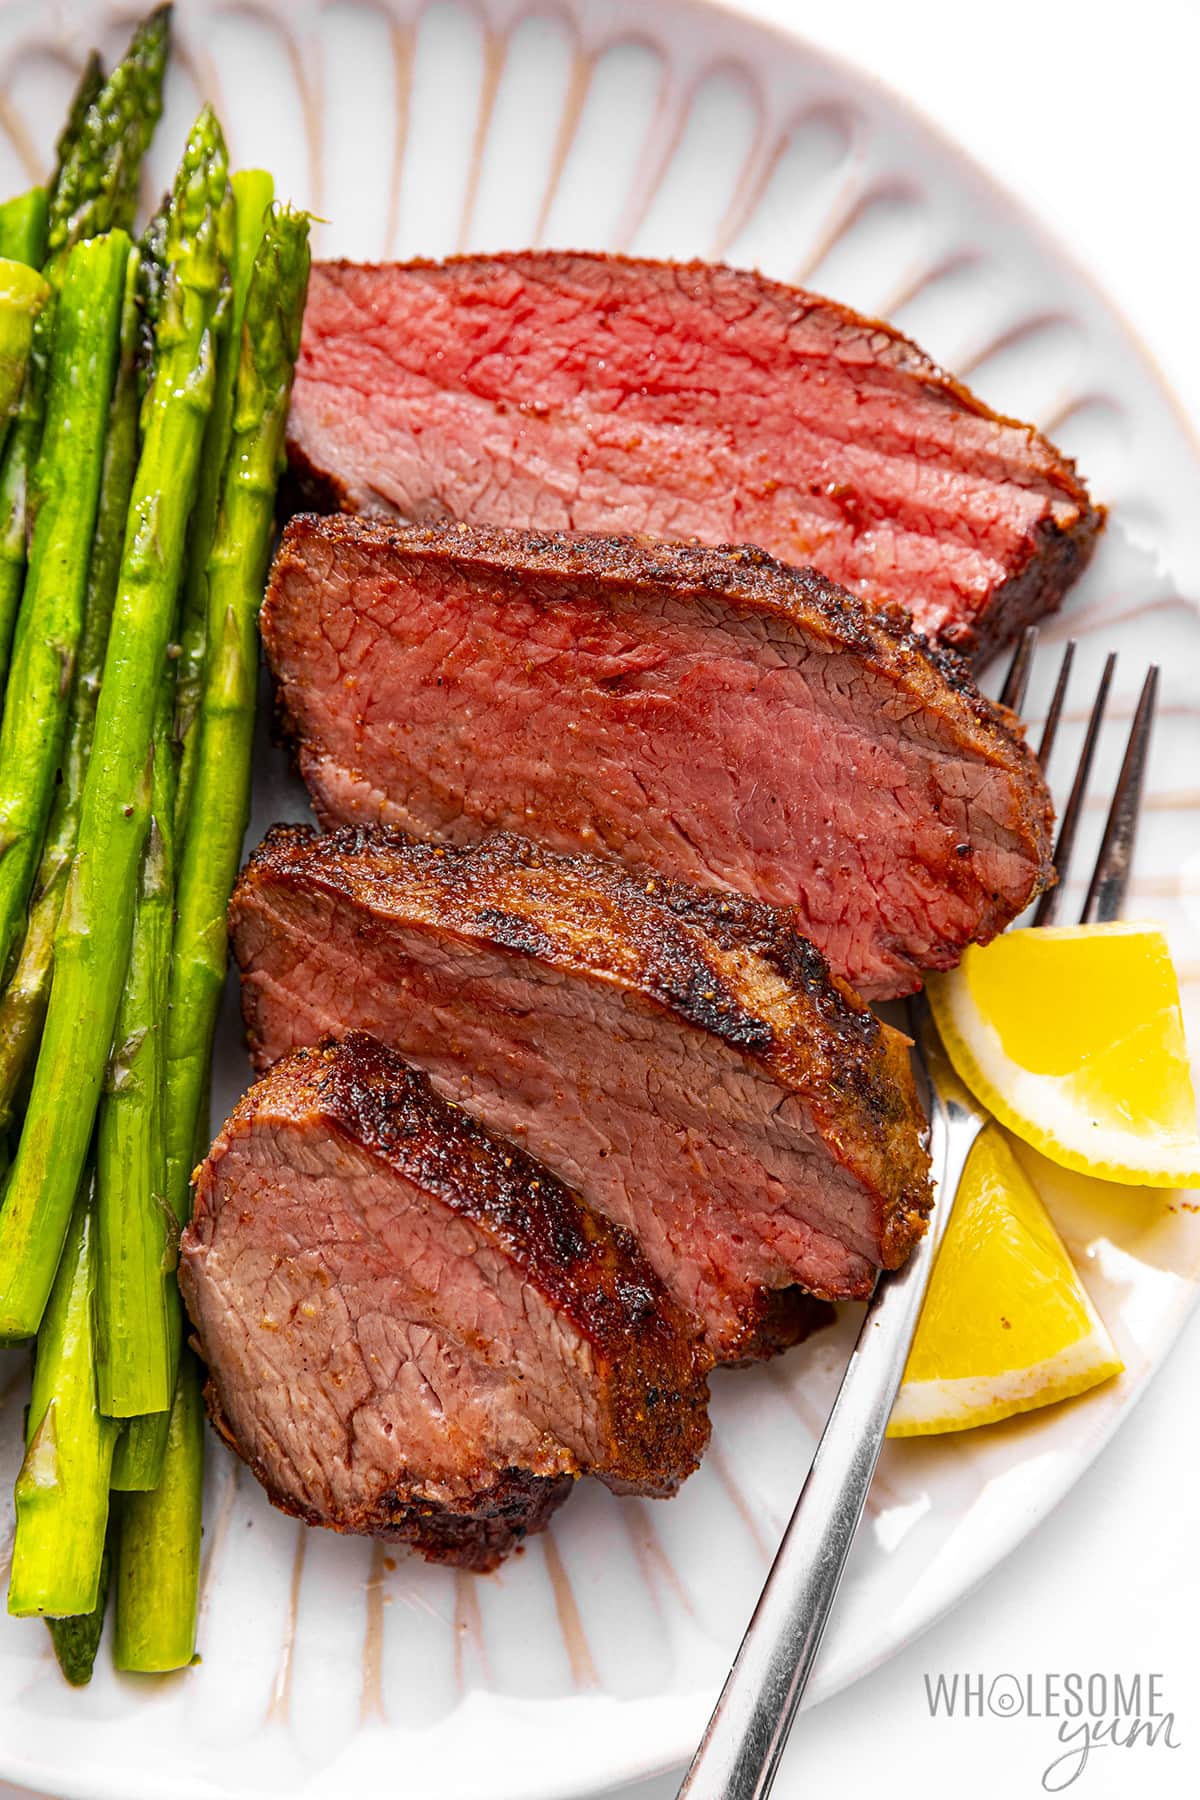 Place tri-tip slices on a plate with asparagus.